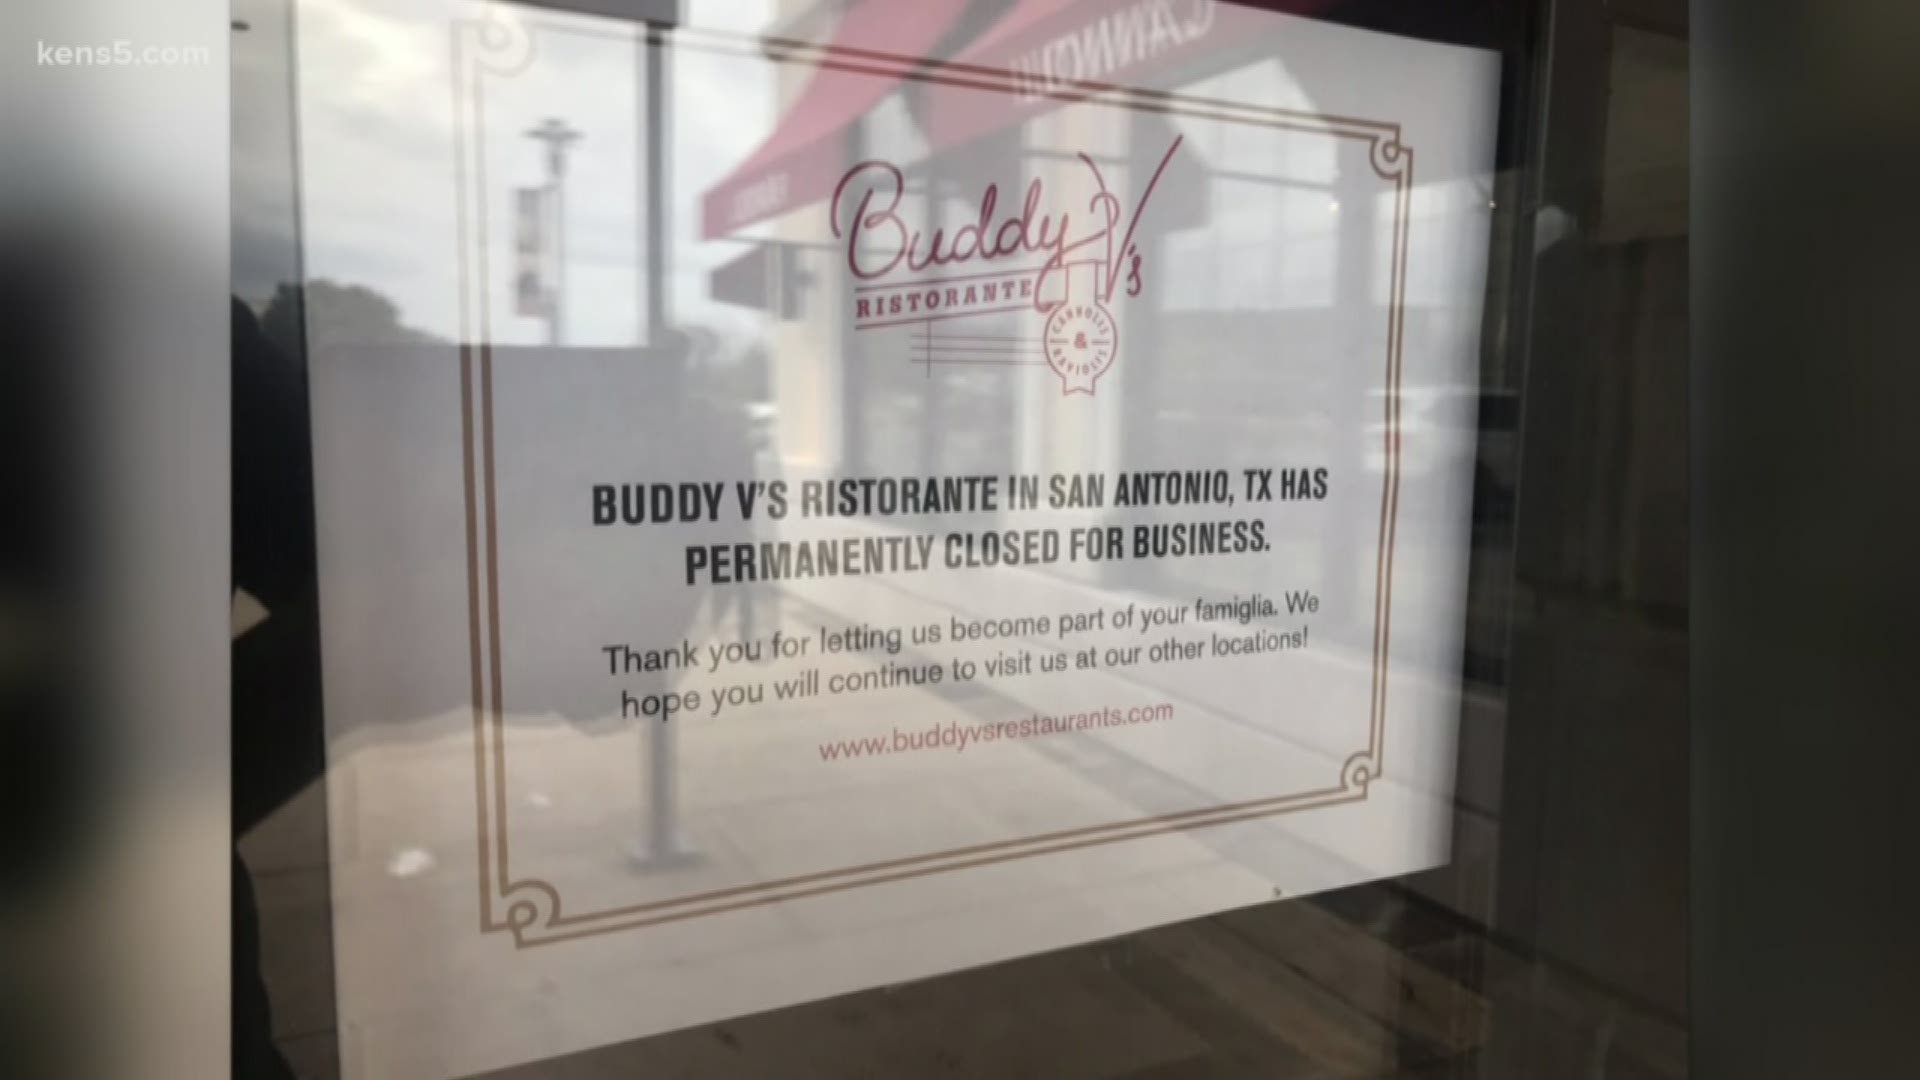 The Cake Boss has hit a bump in the road. Barely a year after opening its doors at La Cantera, Buddy V’s Ristorante has suddenly shuttered them for good. Signage posted on the location’s doors Tuesday confirmed the closure.